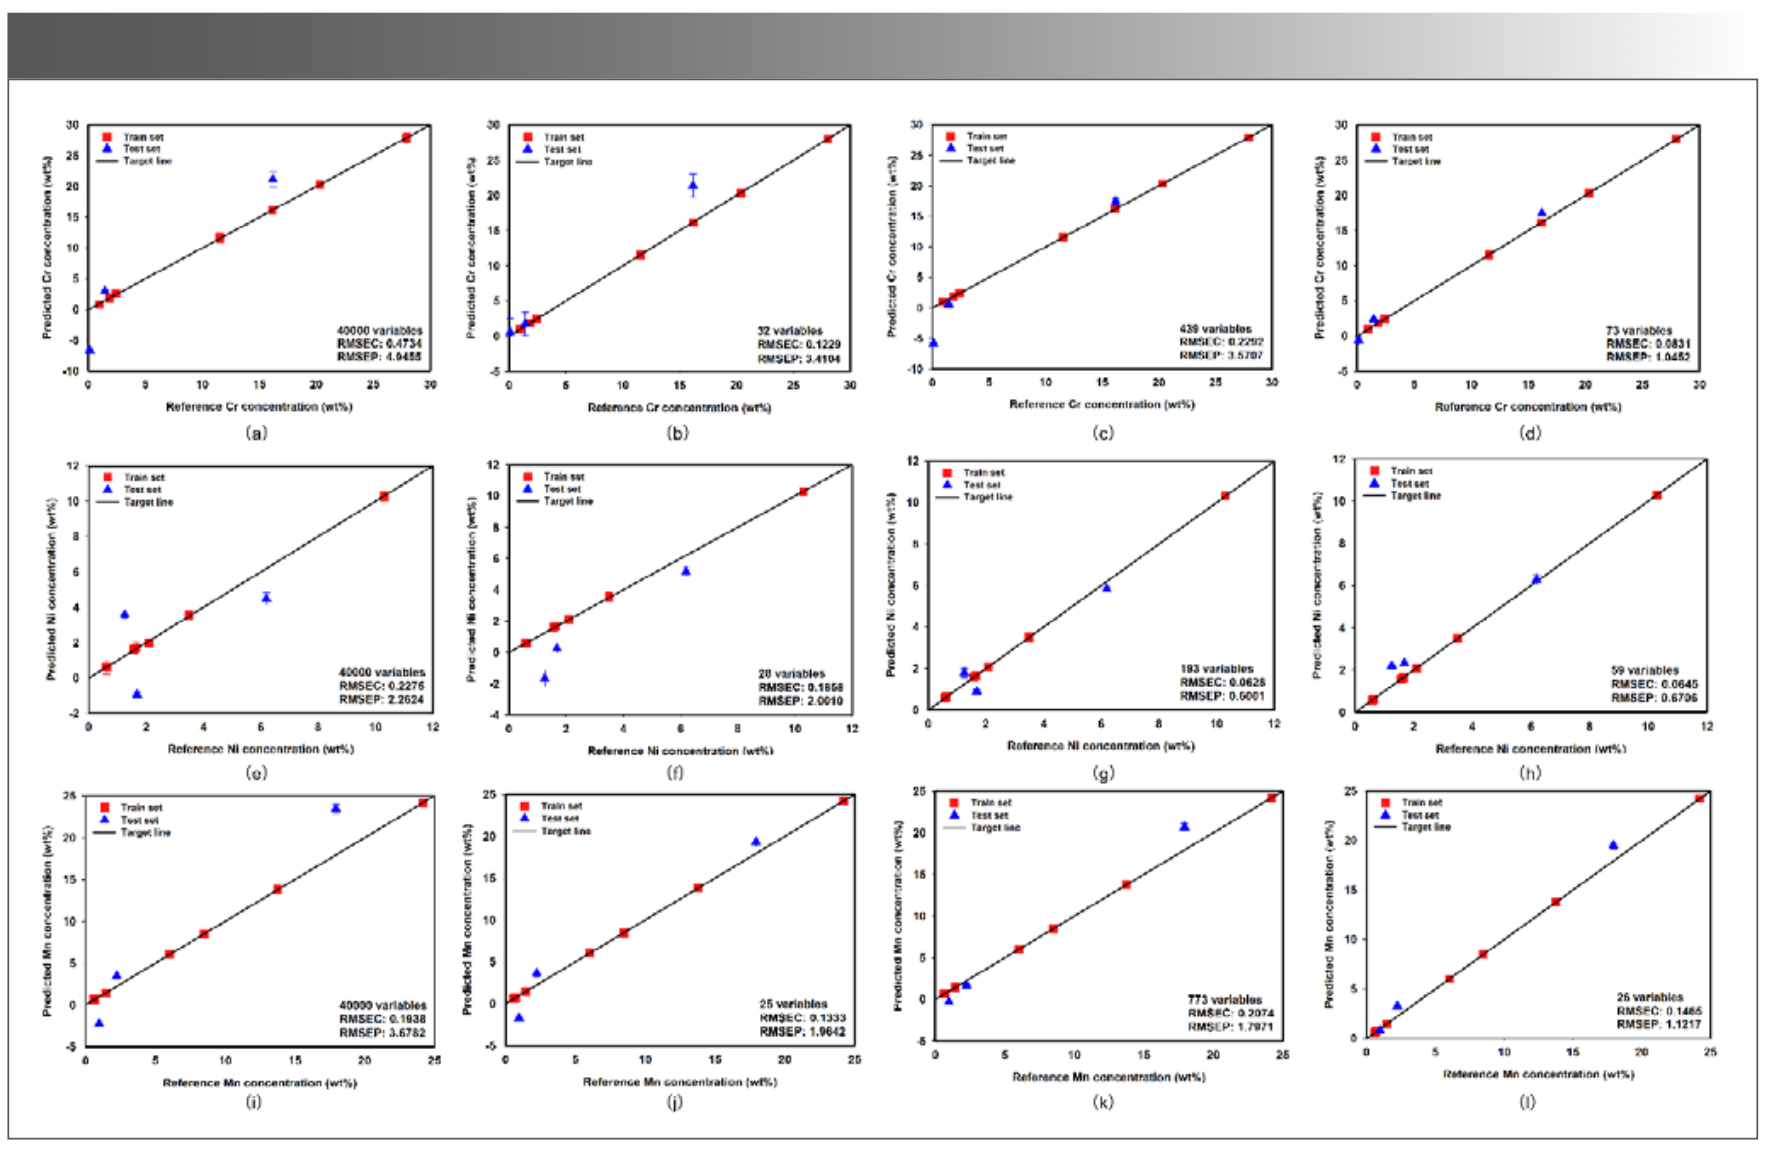 FIGURE 8: Quantification results with different methods for different elements: (a) PLS for Cr, (b) SPA for Cr, (c) UVE for Cr, (d) VSC-mIPW-PLS for Cr, (e) PLS for Ni, (f) SPA for Ni, (g) UVE for Ni, (h) VSC-mIPW-PLS for Ni, (i) PLS for Mn, (j) SPA for Mn, (k) UVE for Mn, (l) VSC-mIPW-PLS for Mn.